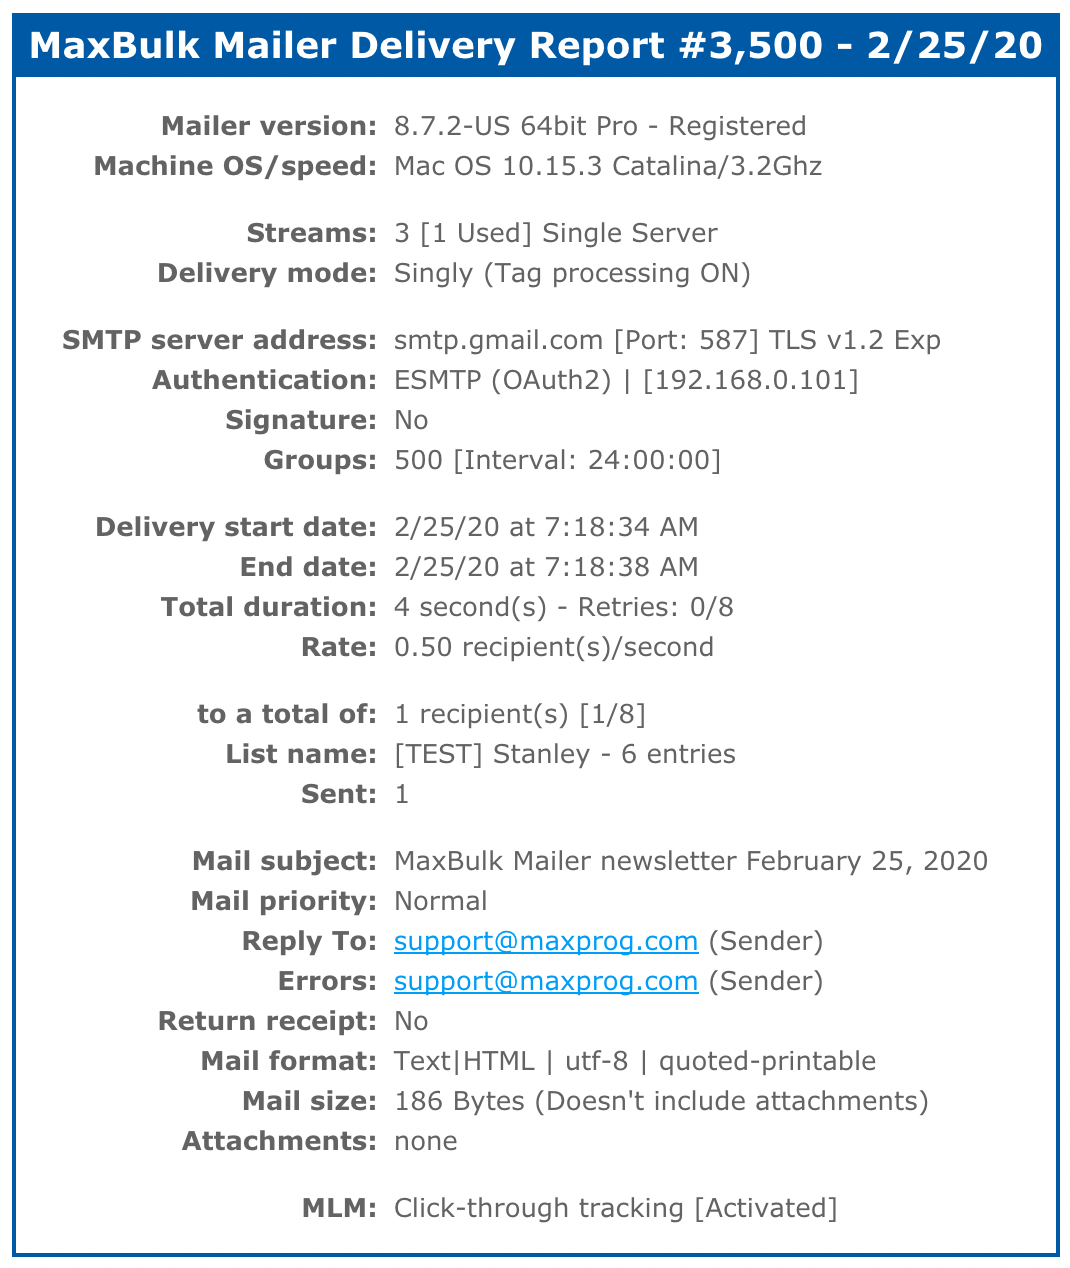 Delivery report sent by MaxBulk Mailer after each delivery